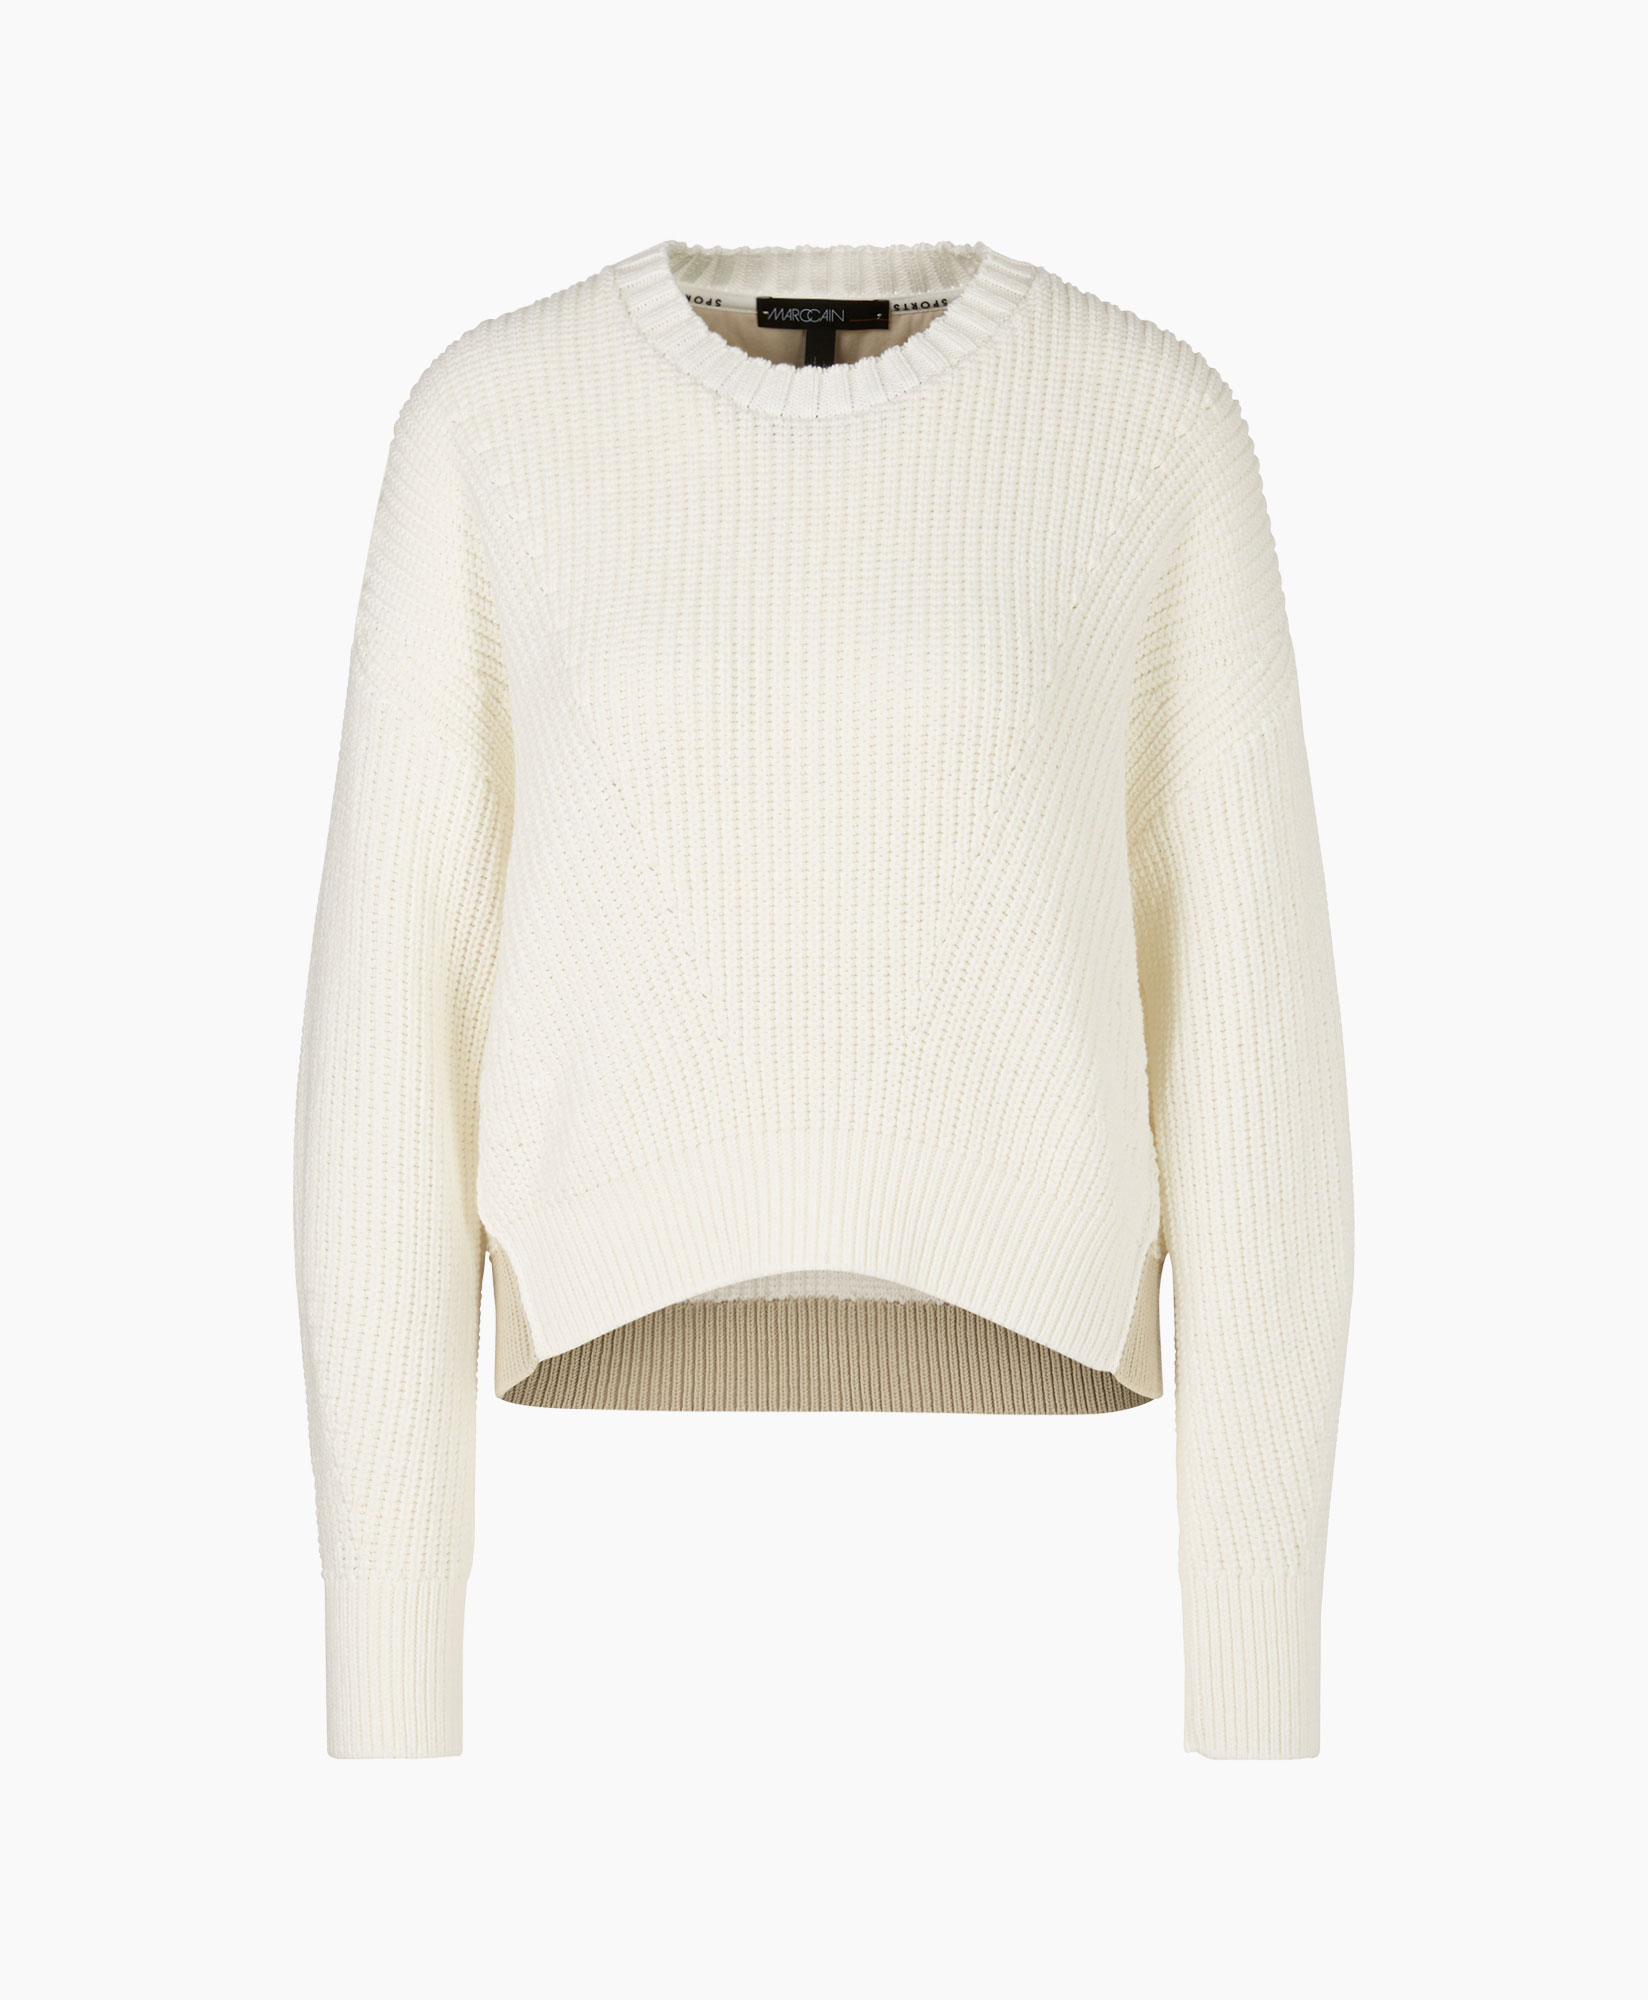 Pullover Ws 41.01 M04 Off White